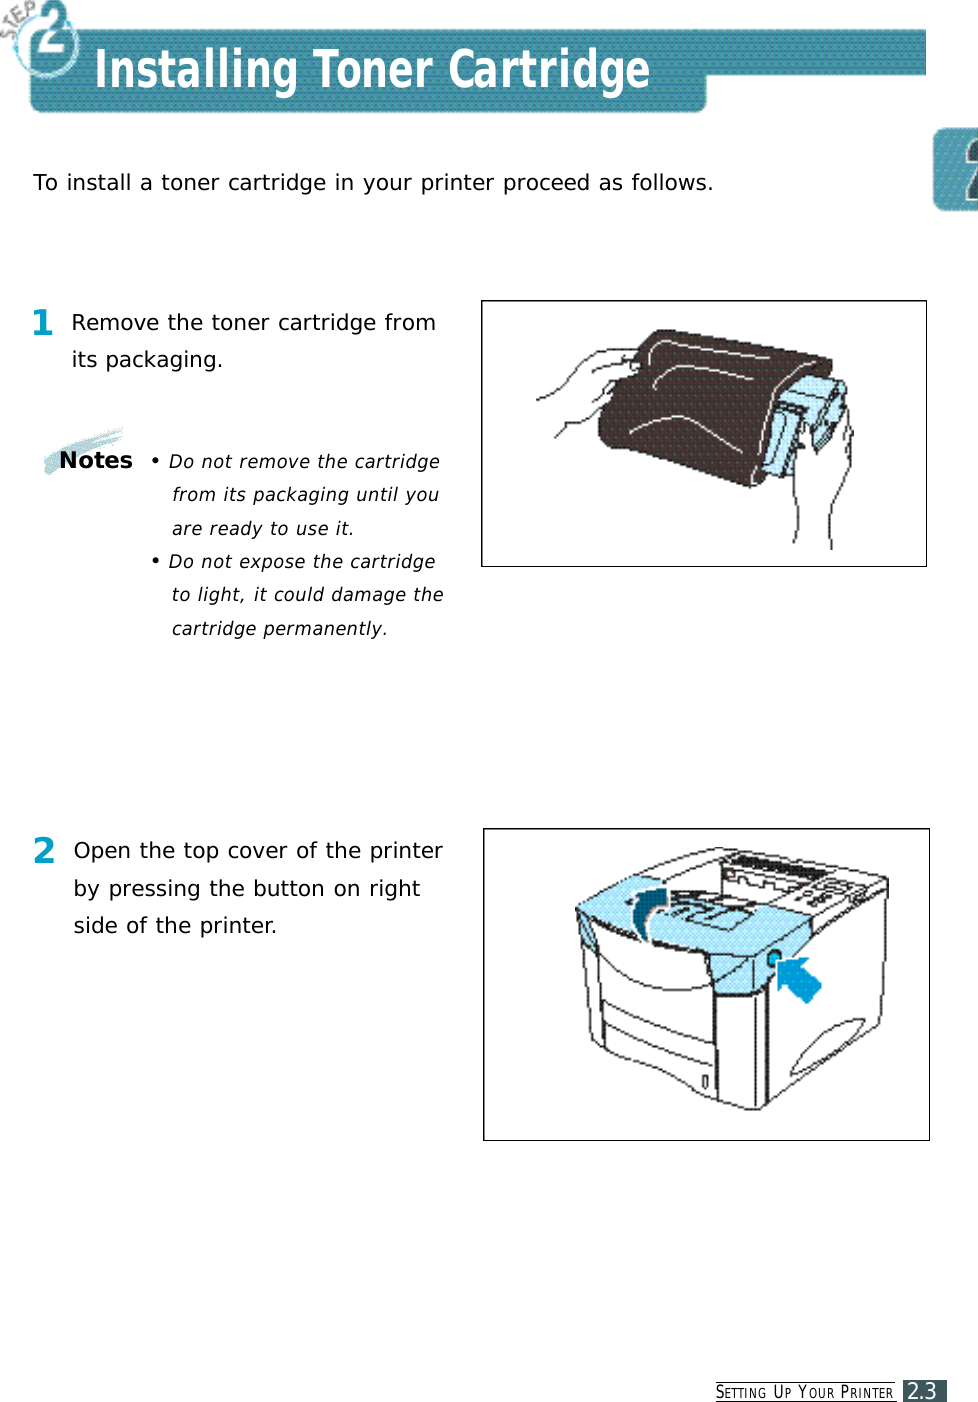 SE T T I N G UPYO U R PR I N T E R2.3Installing Toner CartridgeTo install a toner cartridge in your printer proceed as follows.1Remove the toner cartridge fromits packaging.2Open the top cover of the printerby pressing the button on rightside of the printer.Notes •Do not remove the cartridgefrom its packaging until youare ready to use it. •Do not expose the cartridgeto light, it could damage thecartridge permanently.